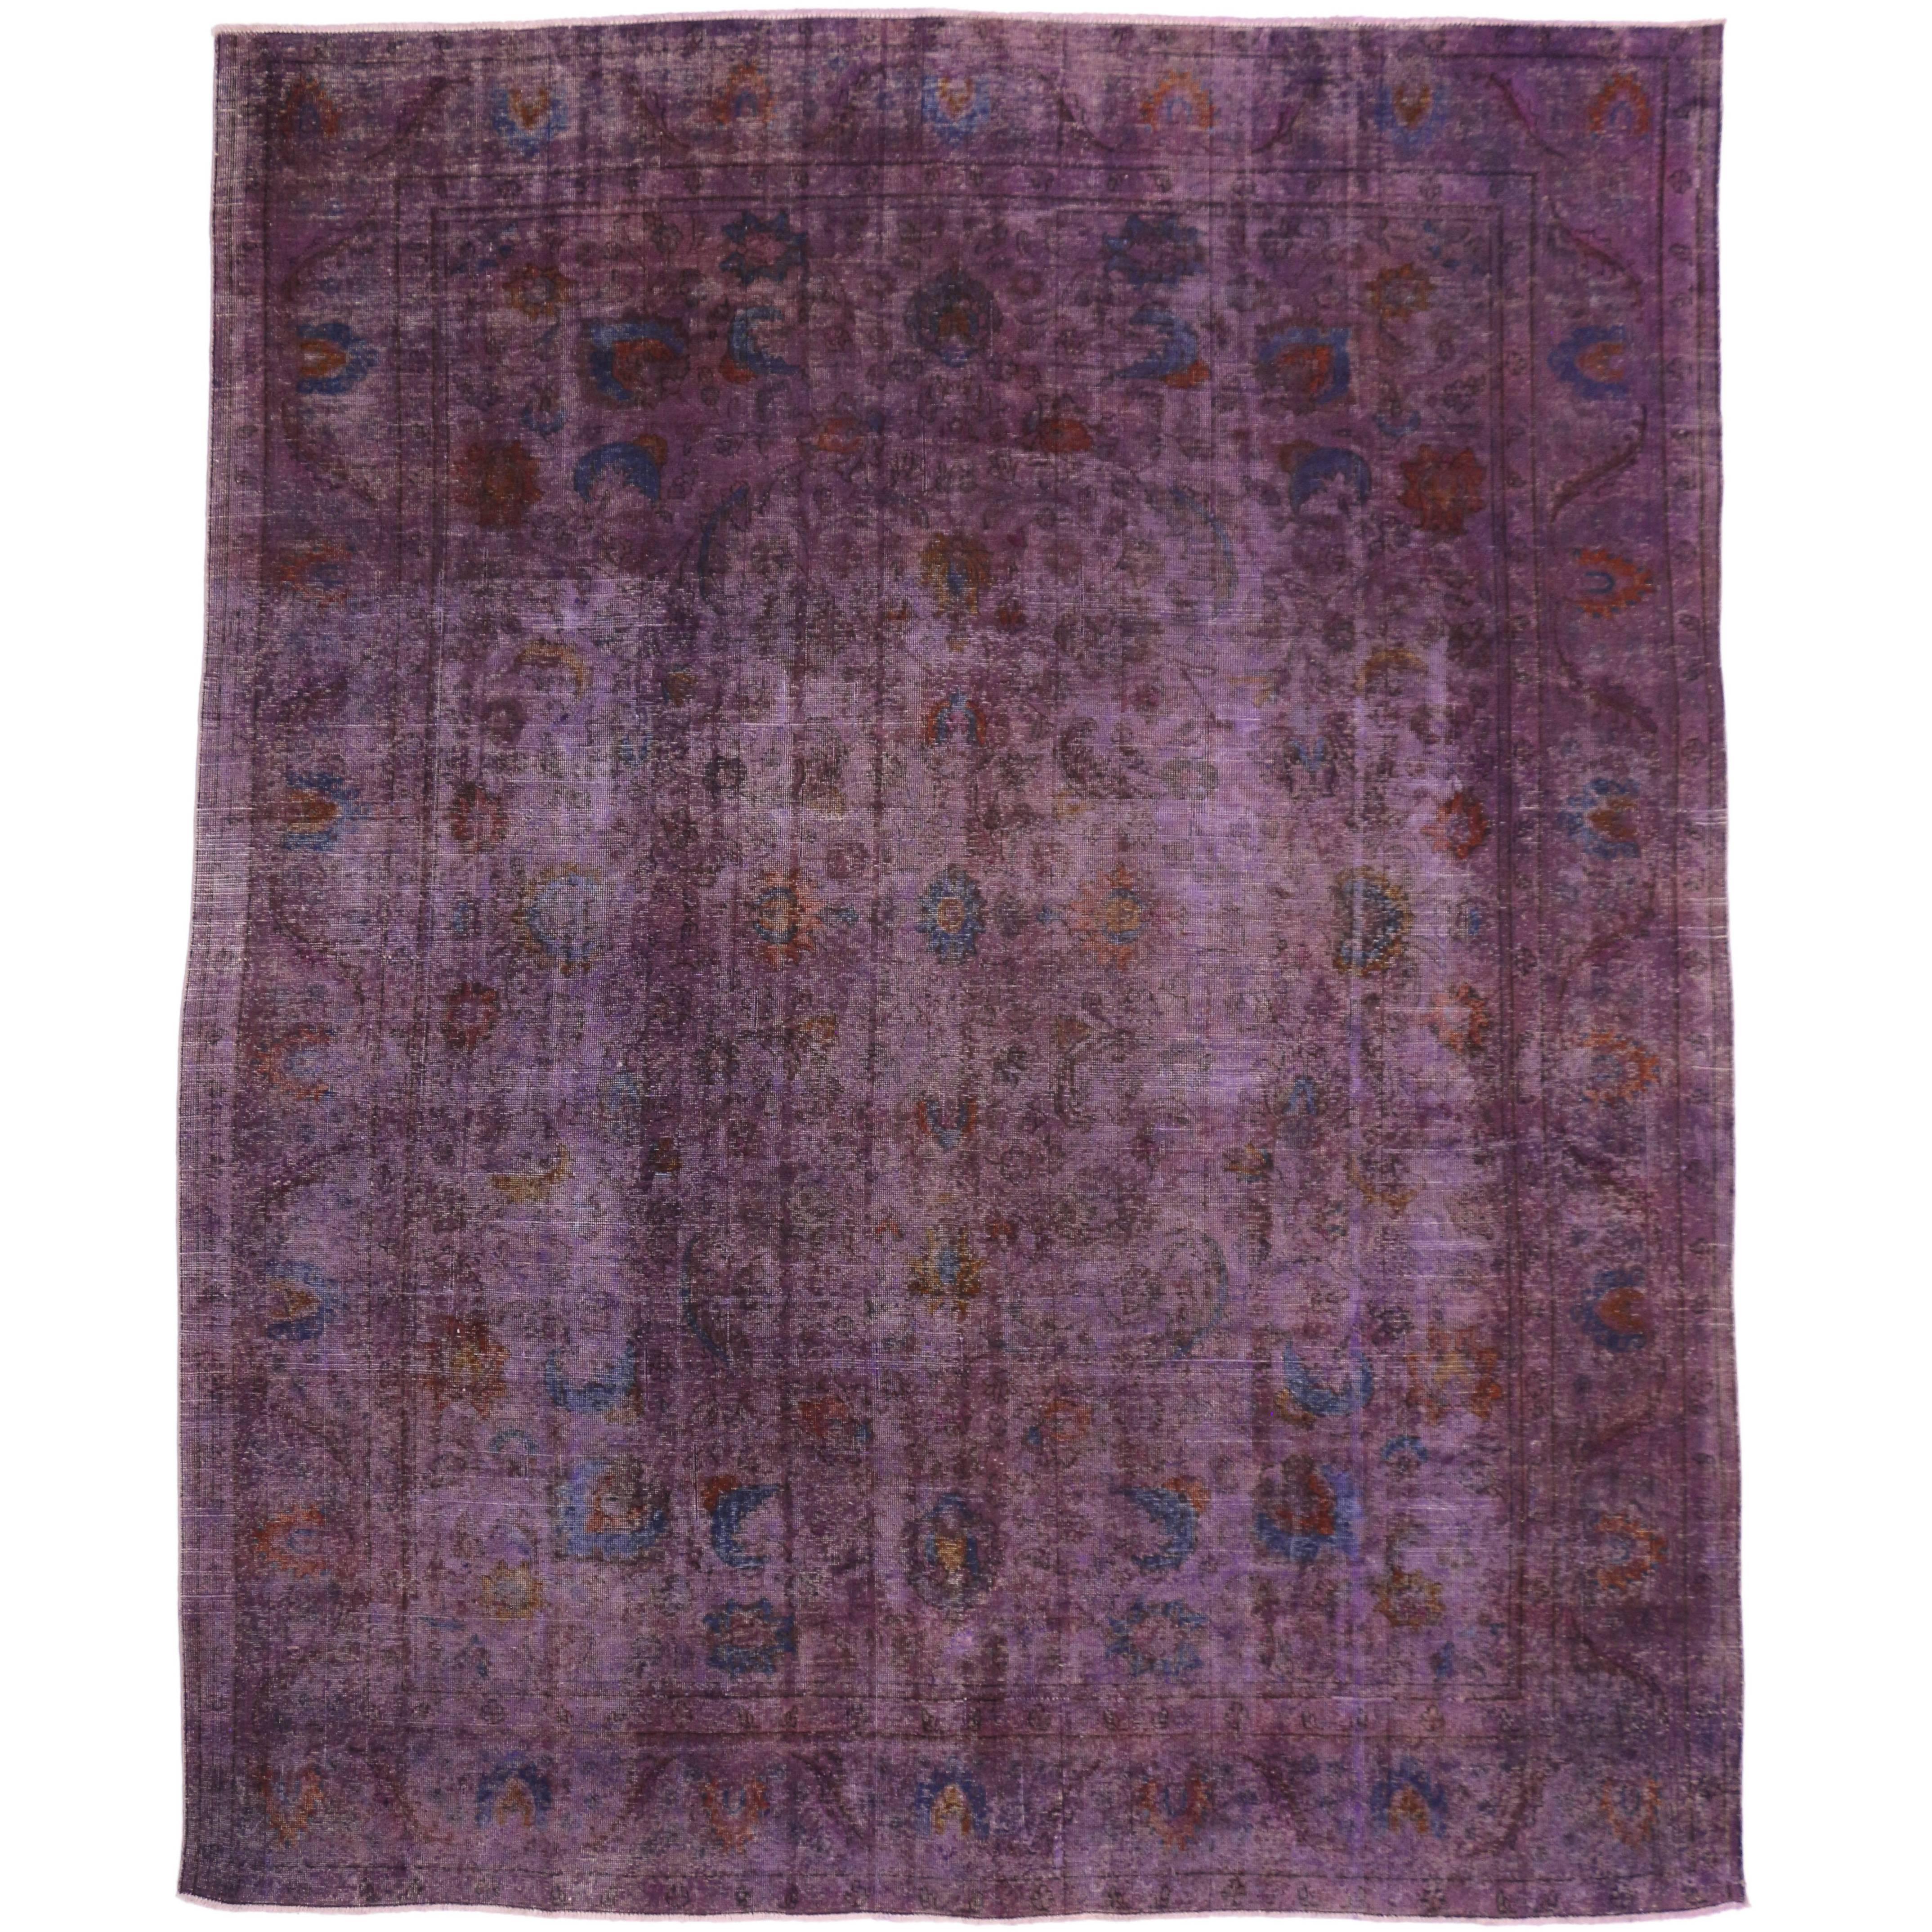 Distressed Overdyed Purple Persian Rug with PostModern Memphis Style